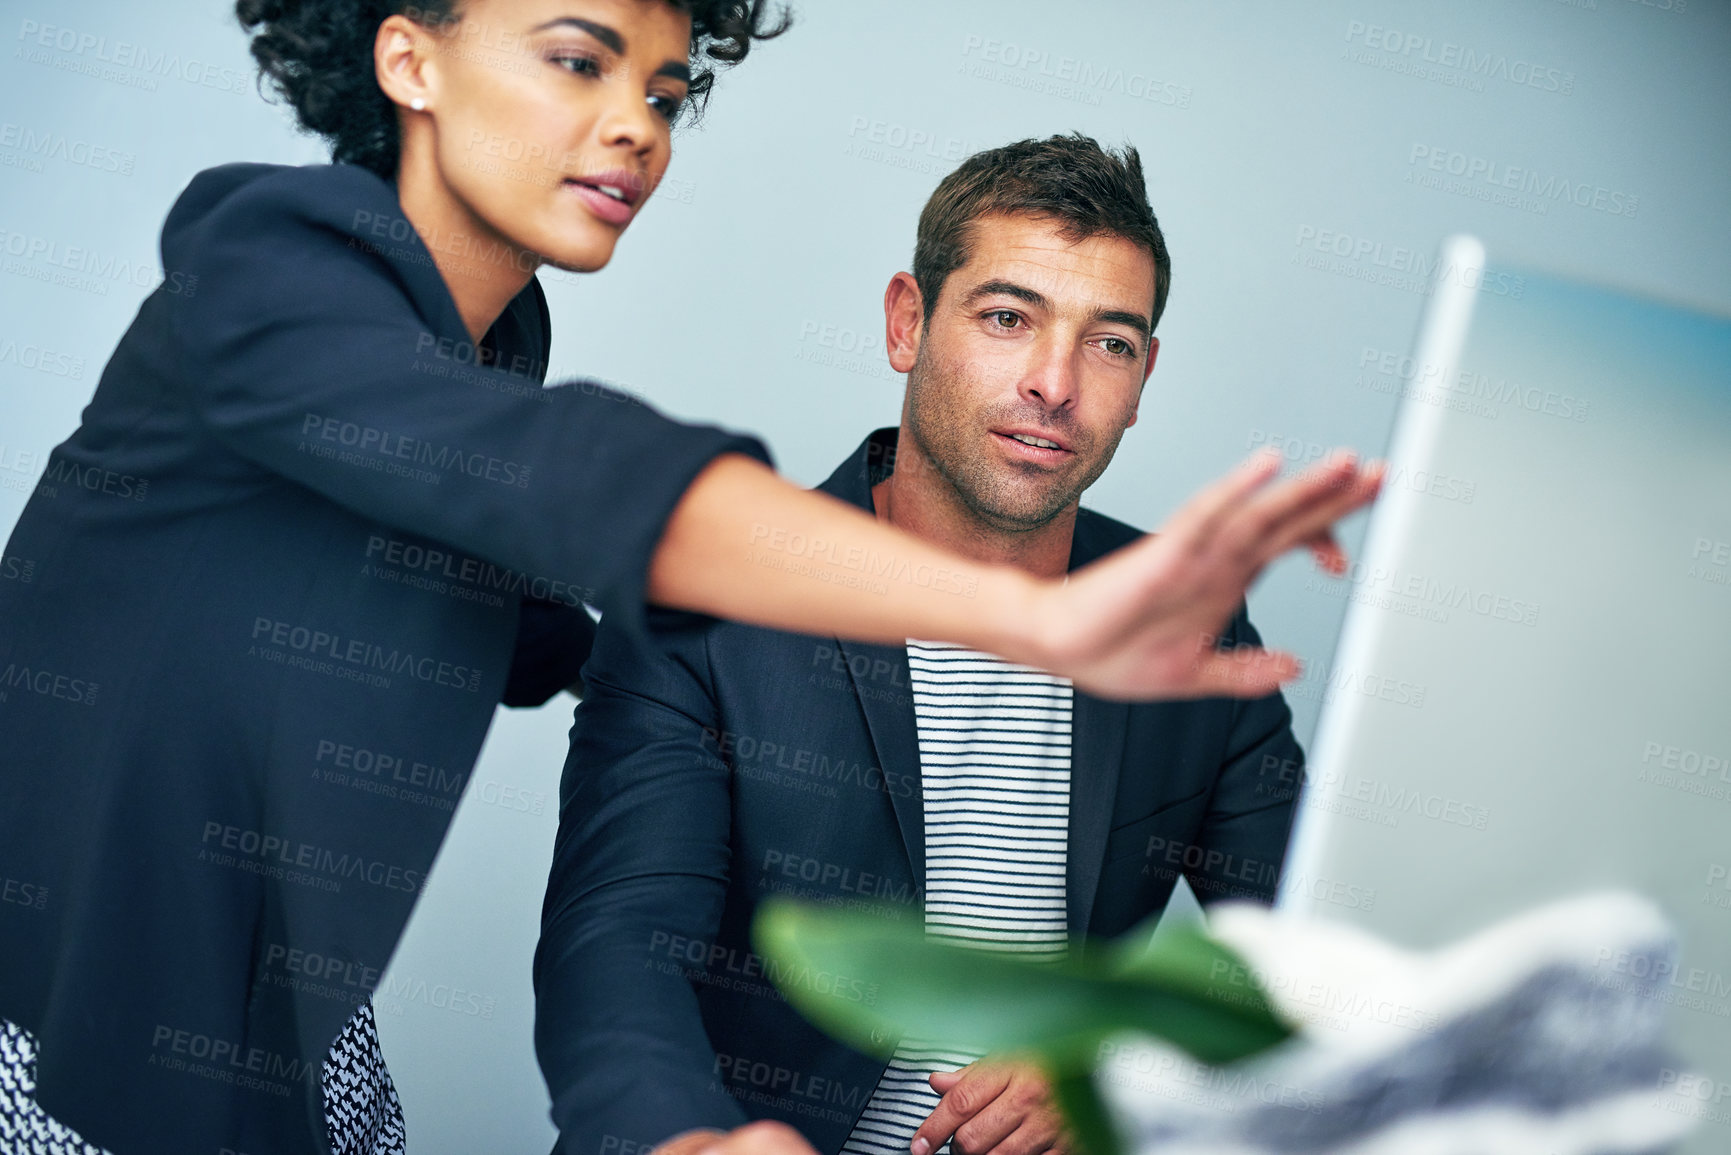 Buy stock photo Shot of two coworkers working together at a computer in an office